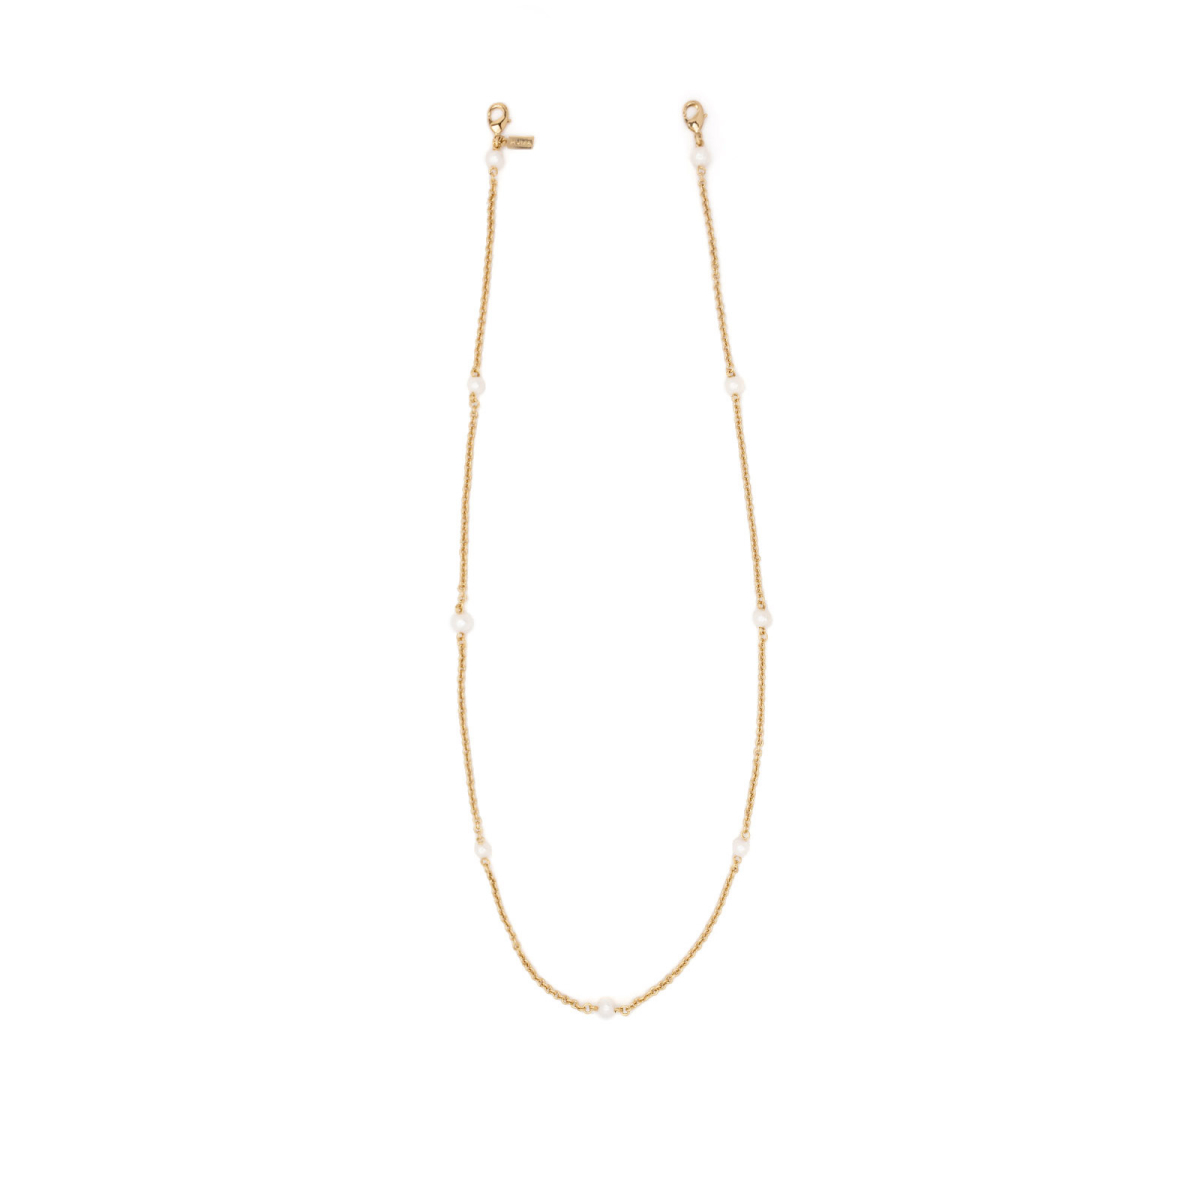 Huma® Accessories: River Pearls Chain color Gold P12 - product thumbnail 2/3.